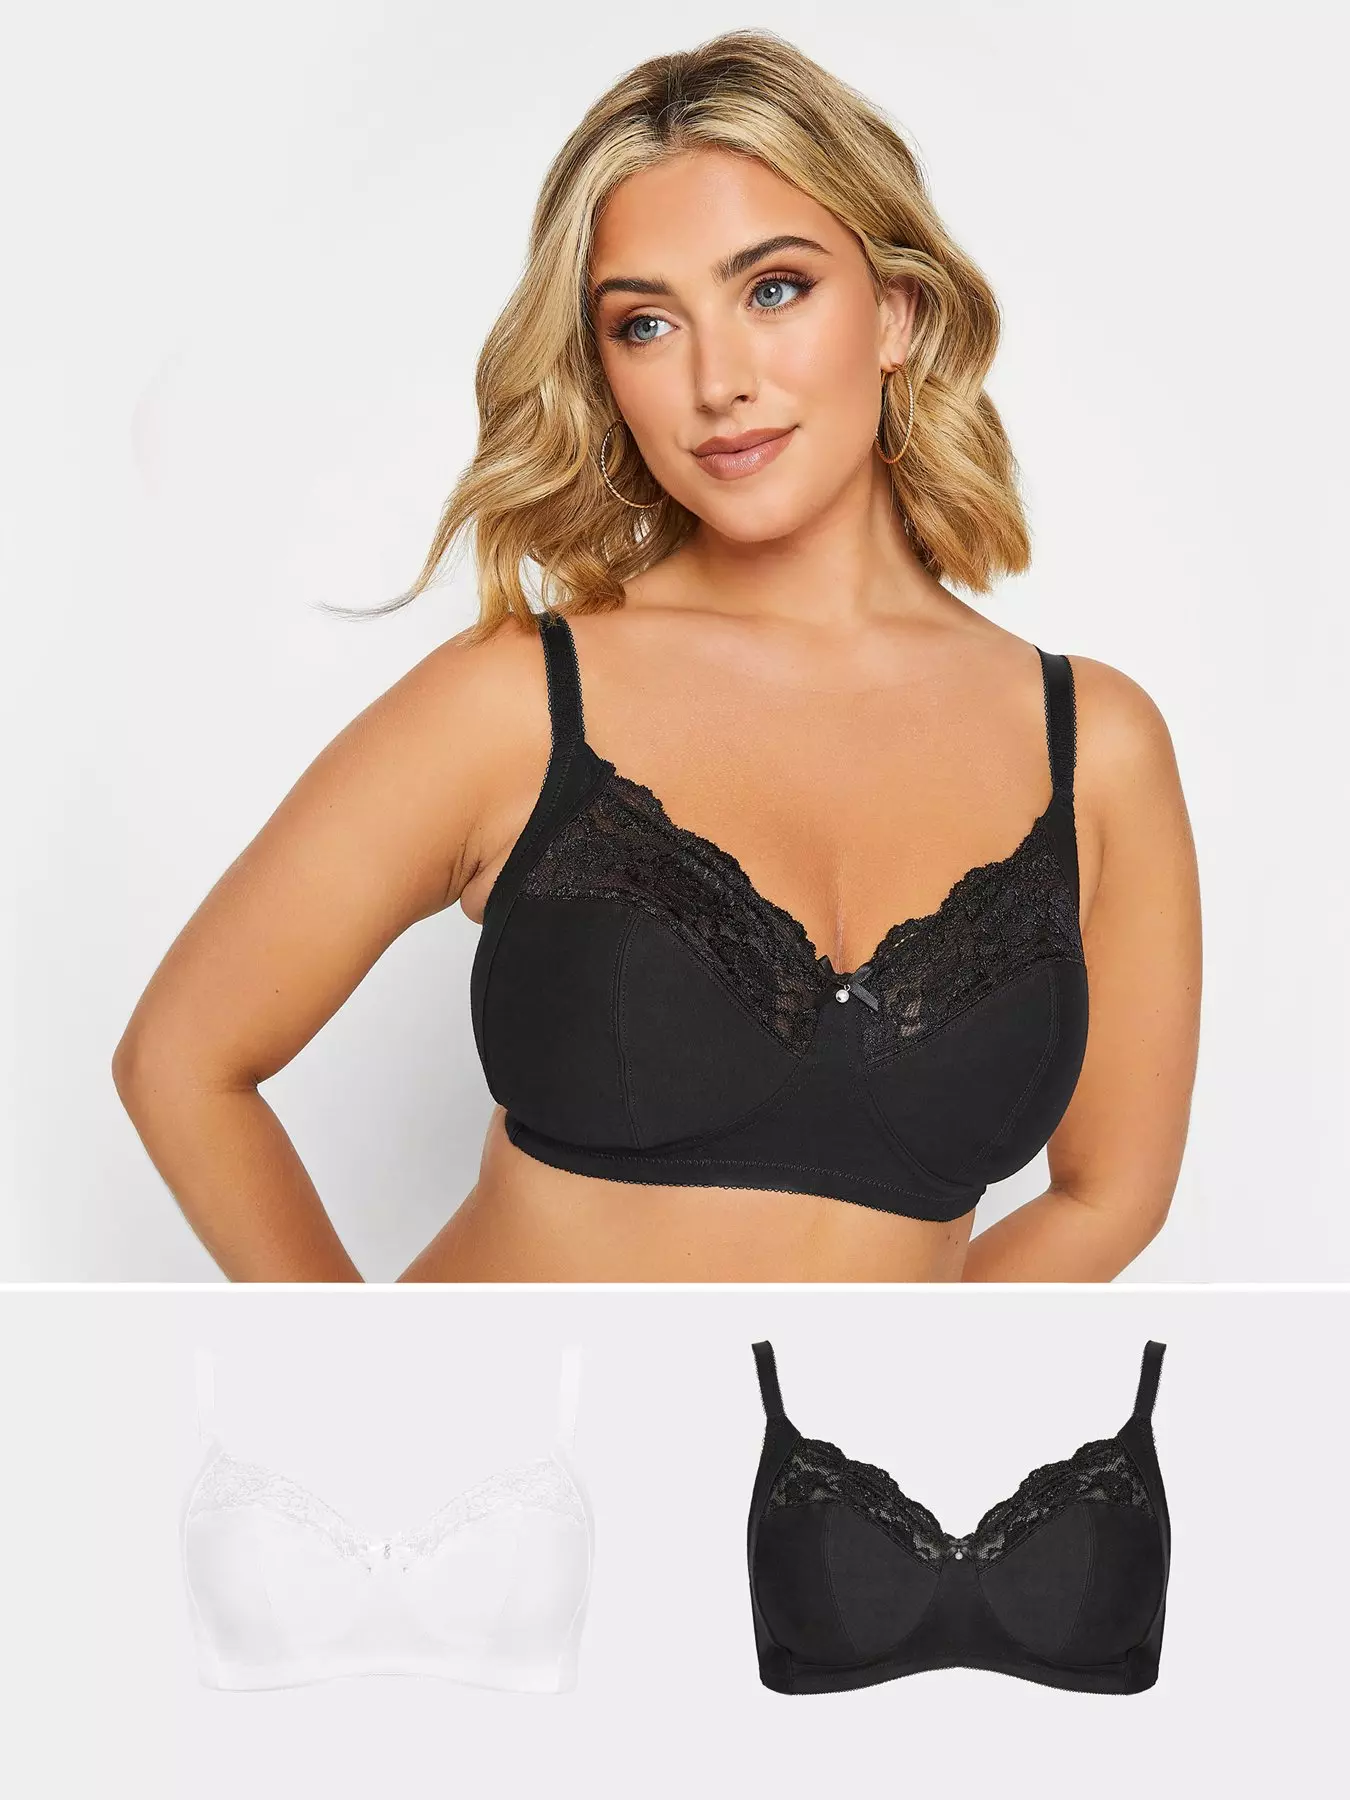 Buy 32AA Bras  Free UK P&P – tagged Non wired – Little Women